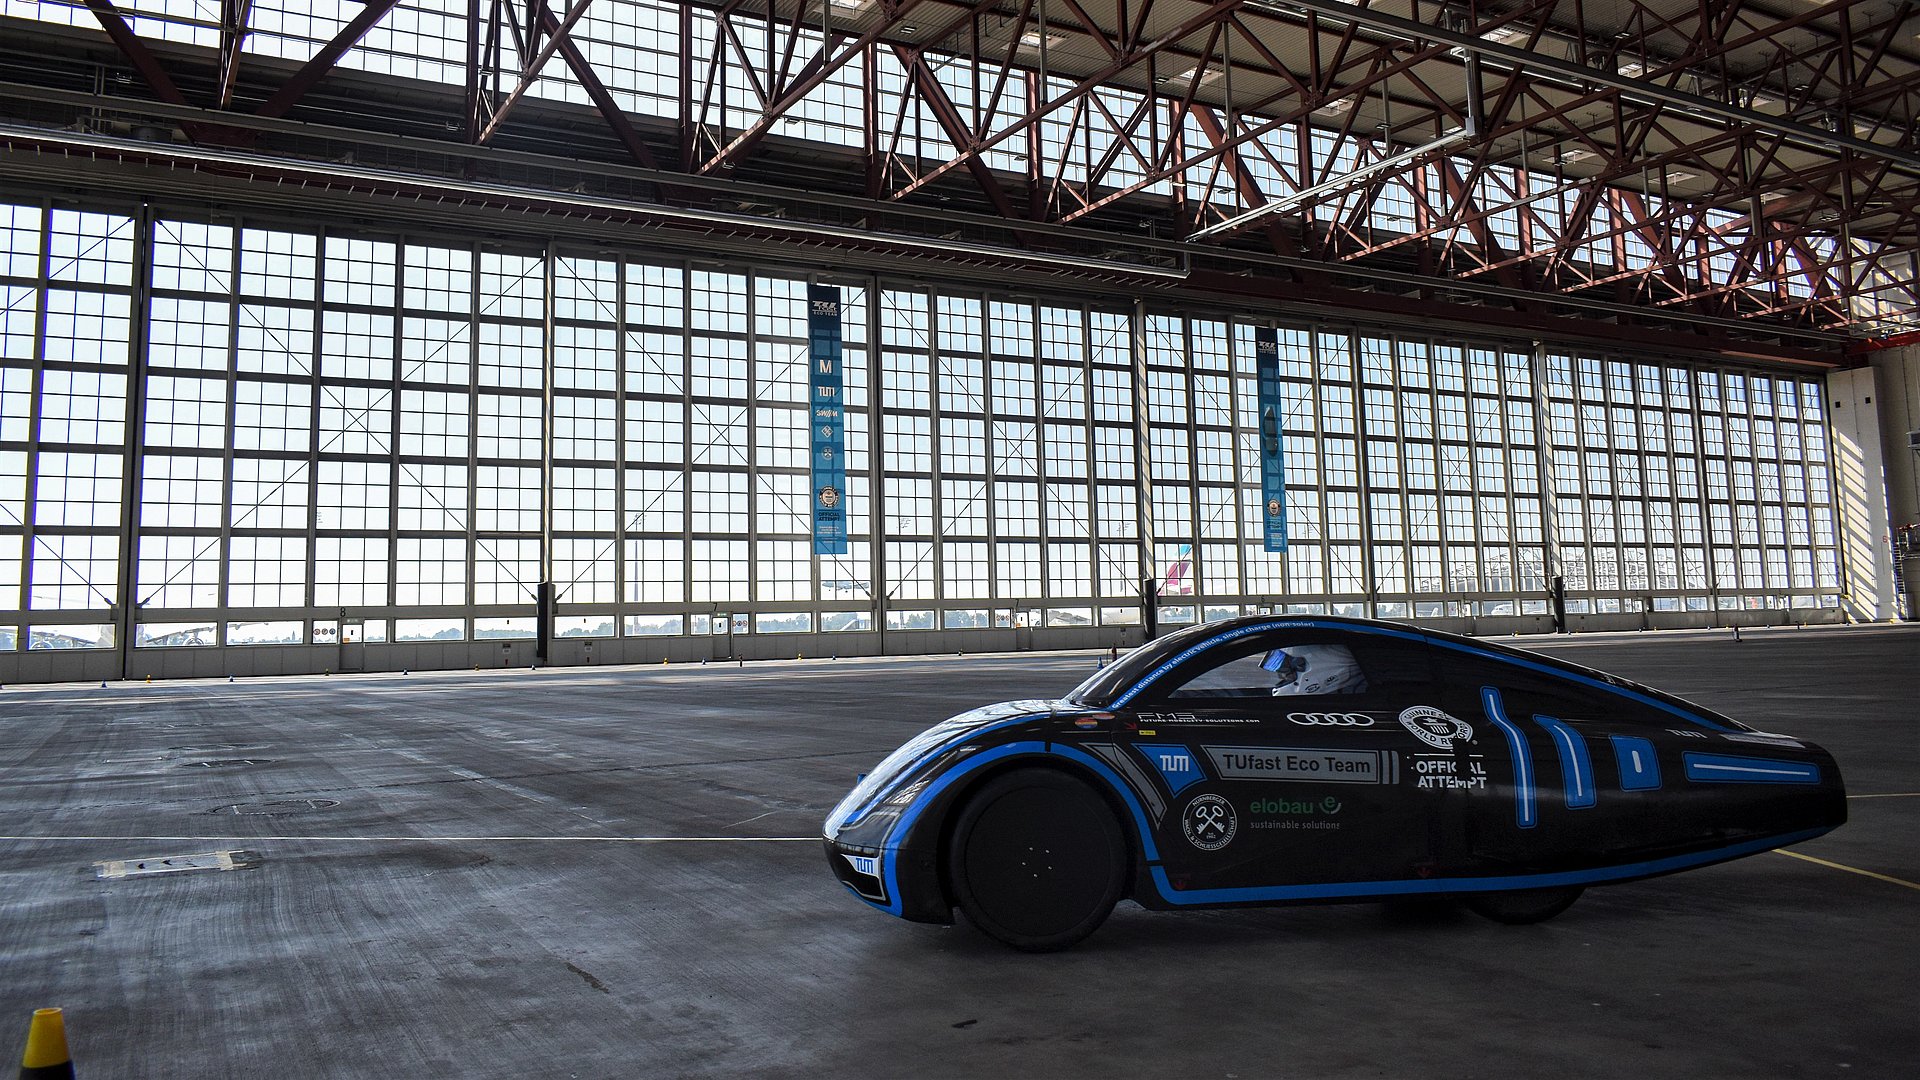 A competition car drives in an airplane hangar to break a world record.